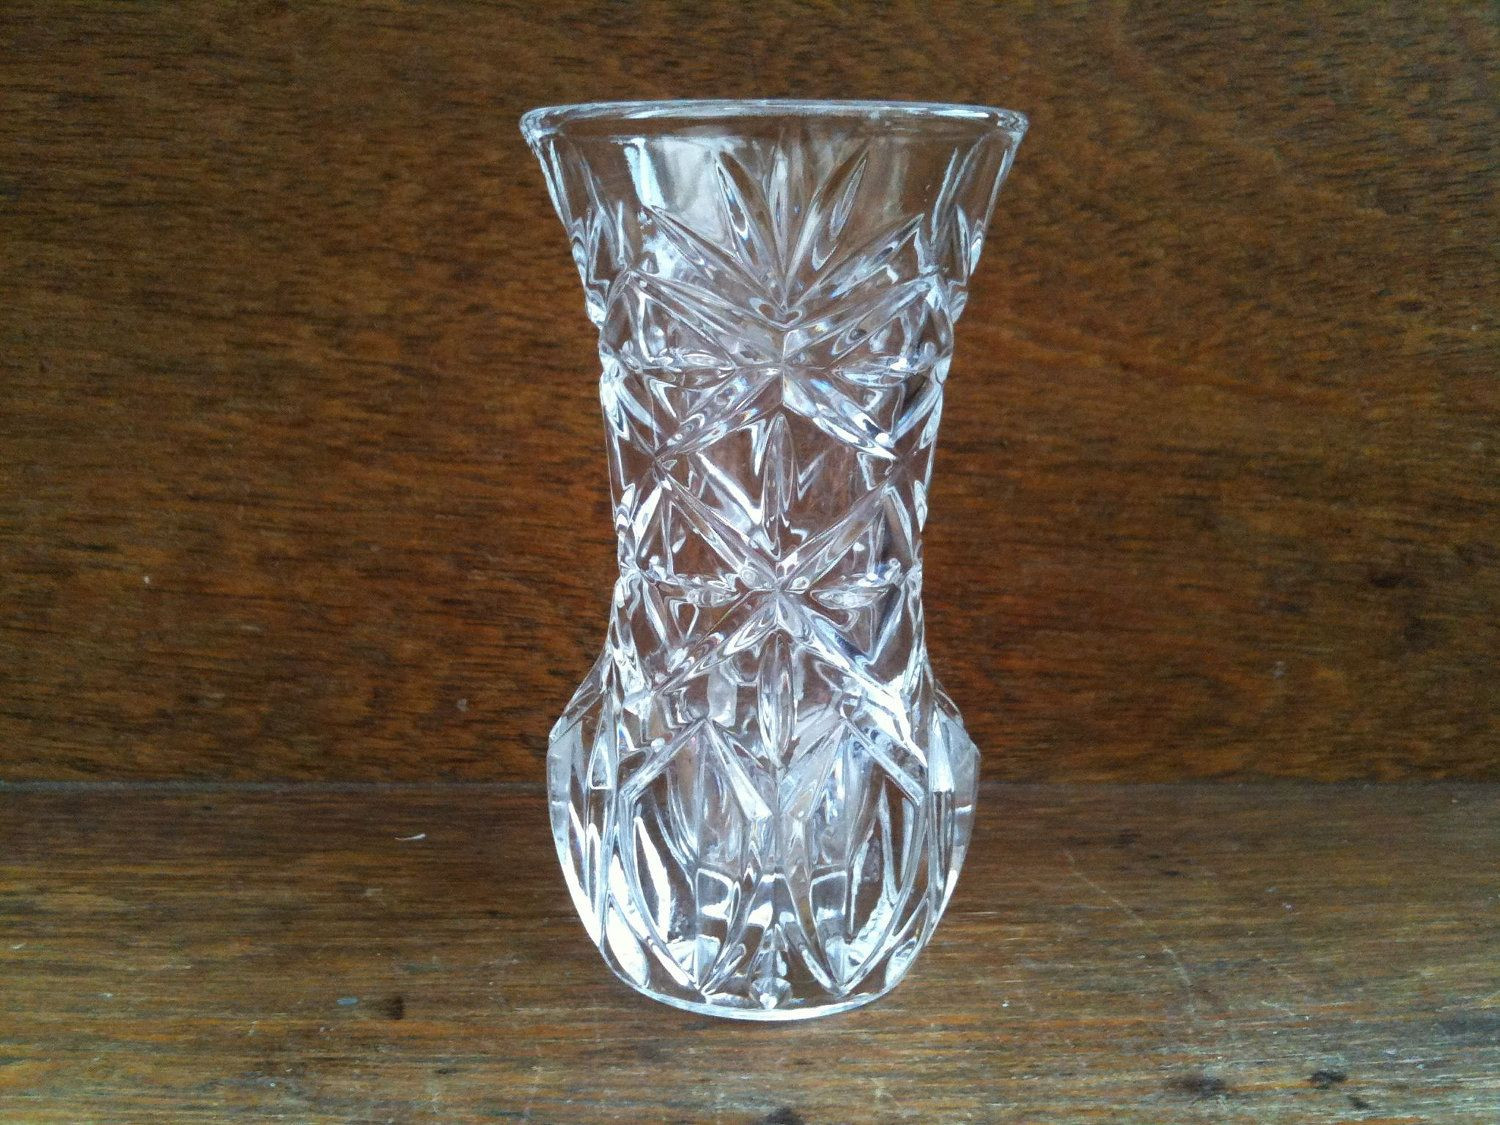 12 Elegant Vintage Lead Crystal Vase 2024 free download vintage lead crystal vase of vintage english small bud lead crystal glass vase circa 1950s in vintage english small bud lead crystal glass vase circa 1950s purchase in store here http